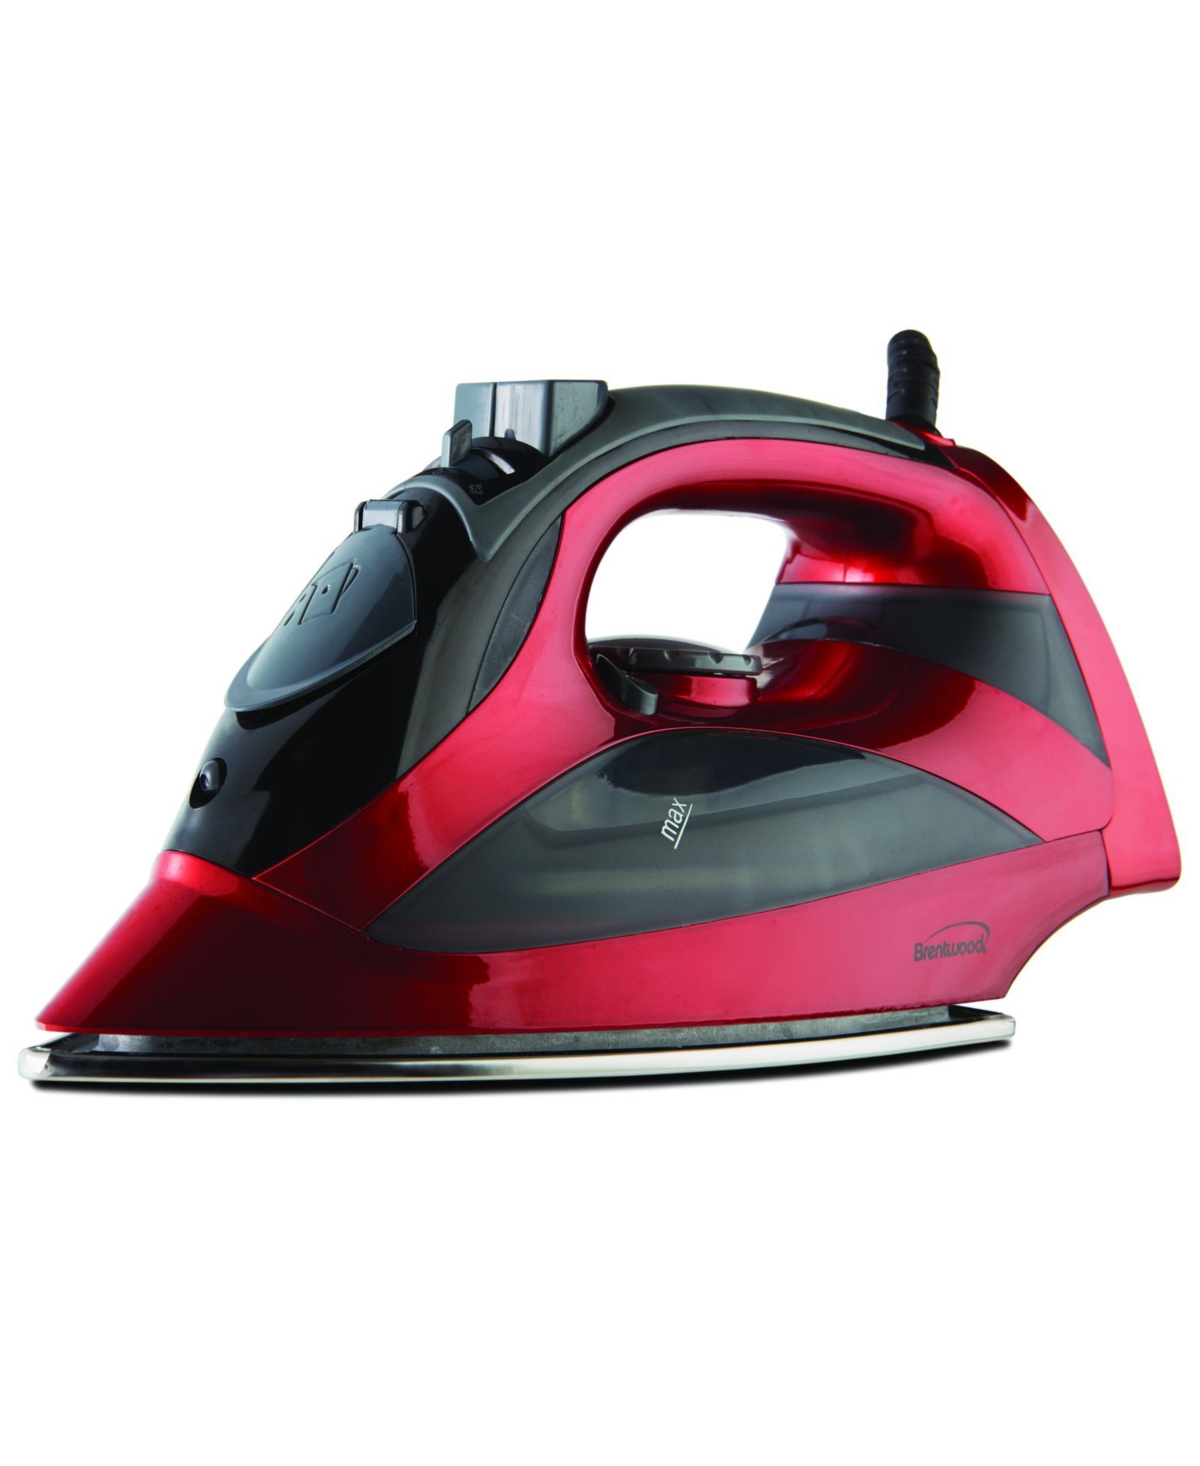 Brentwood Steam Iron With Auto Shut-off - Red - Red